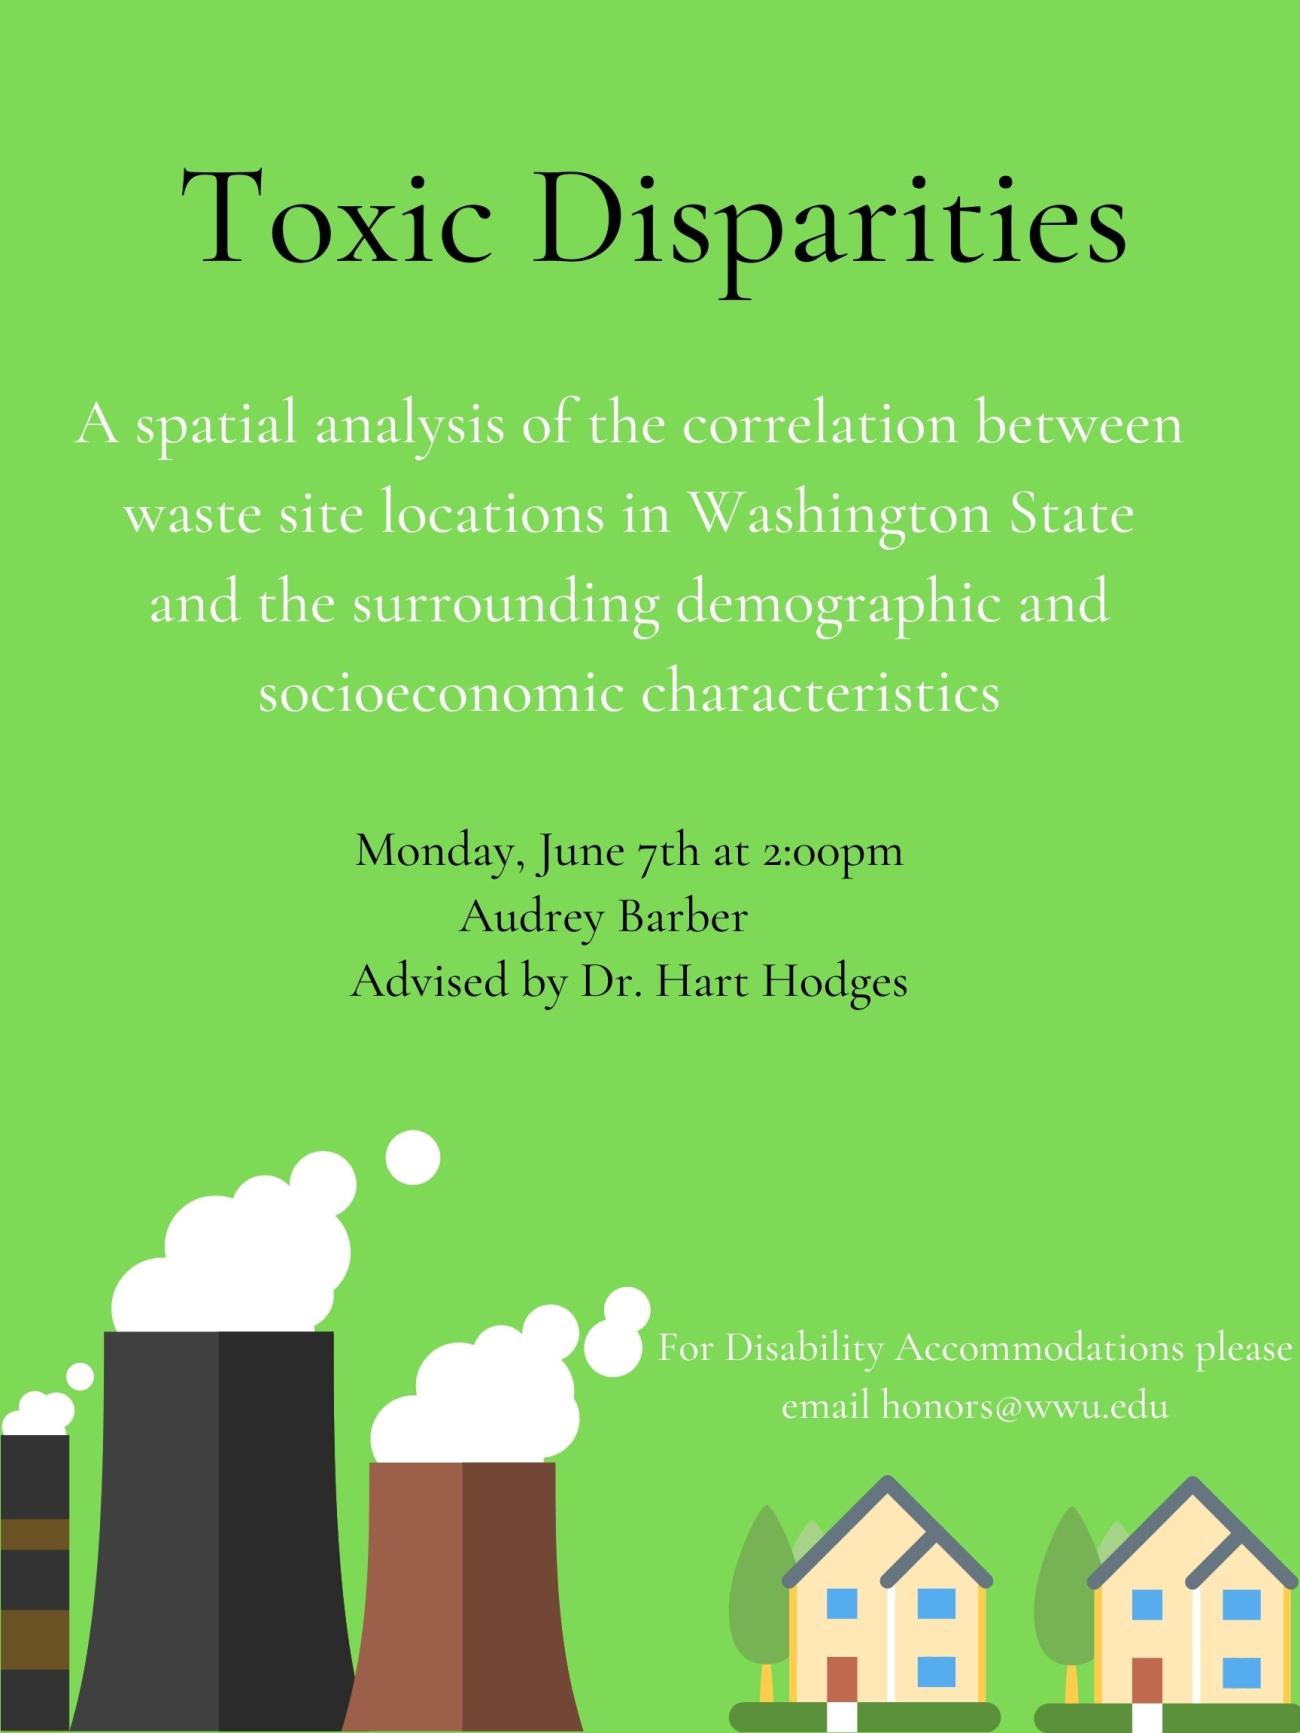 Poster is light green with an illustration of smoke stacks and two cartoon houses at the bottom of the page. The title of the poster reads, "Toxic Disparities: A spatial analysis of the correlation between waste site locations in Washington State and the surrounding demographic and socioeconomic characteristics. Monday, June 7th at 2:00 pm. Audrey Barber, advised by Dr. Hart Hodges. For Disability Accommodations please email honors@wwu.edu."